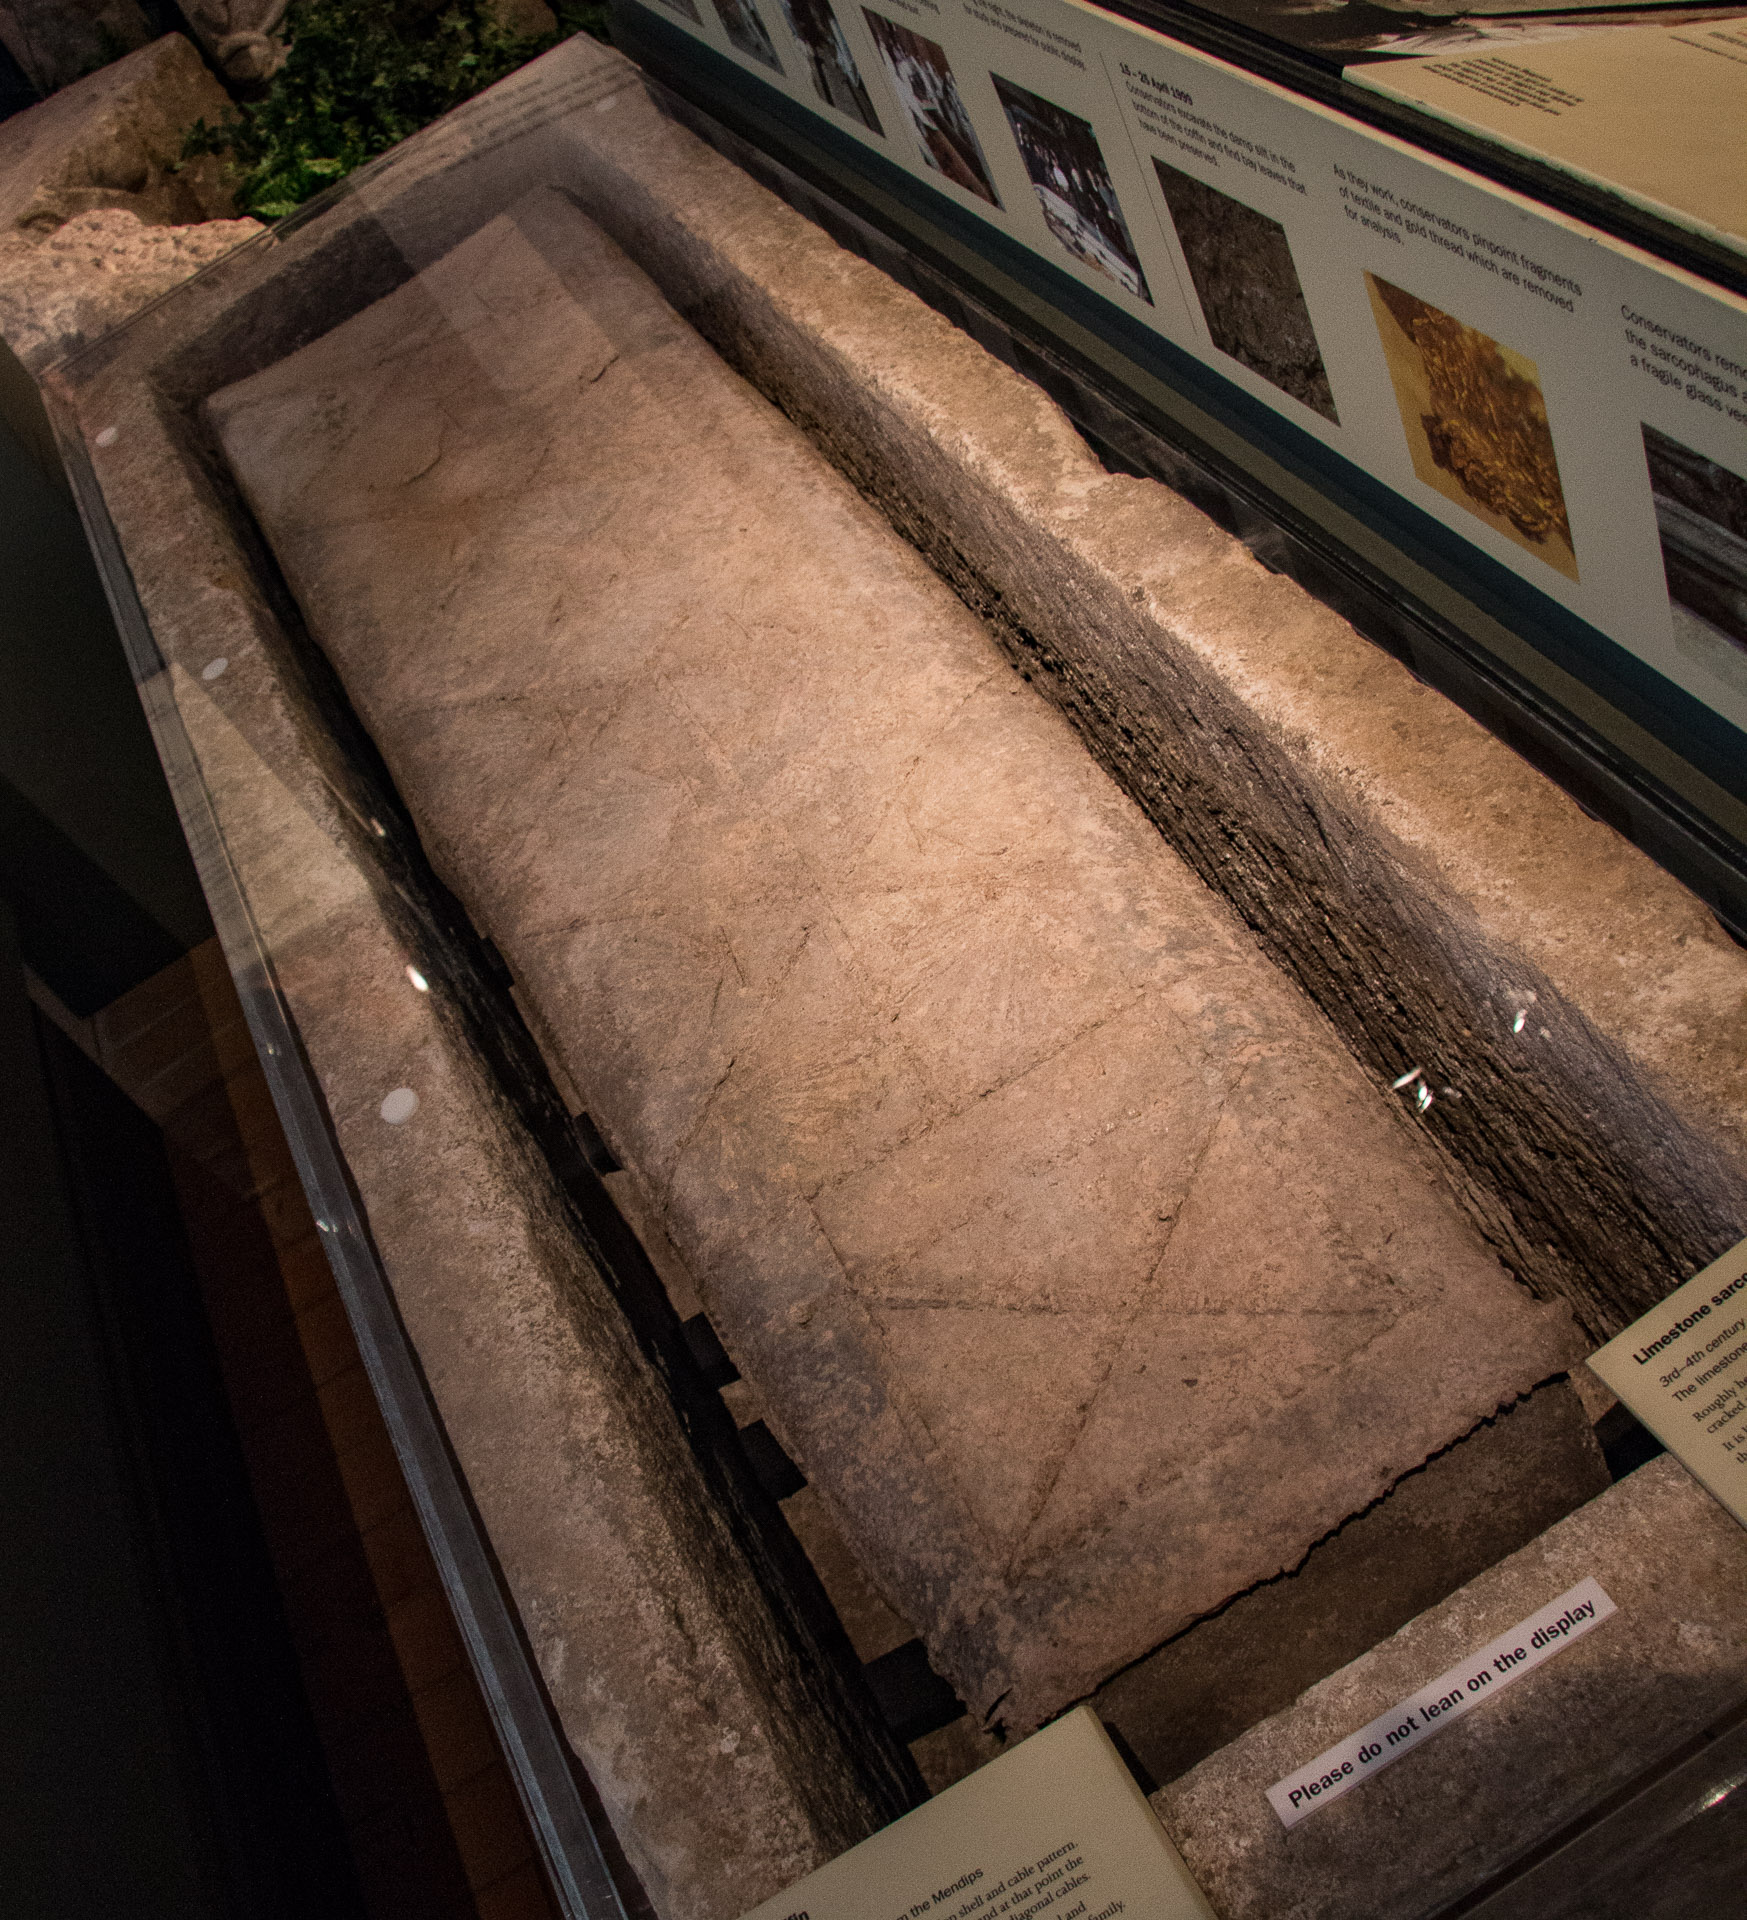 Roman lead coffin and limestone sarcophagus from the 3rd - 4th century at the Museum of London